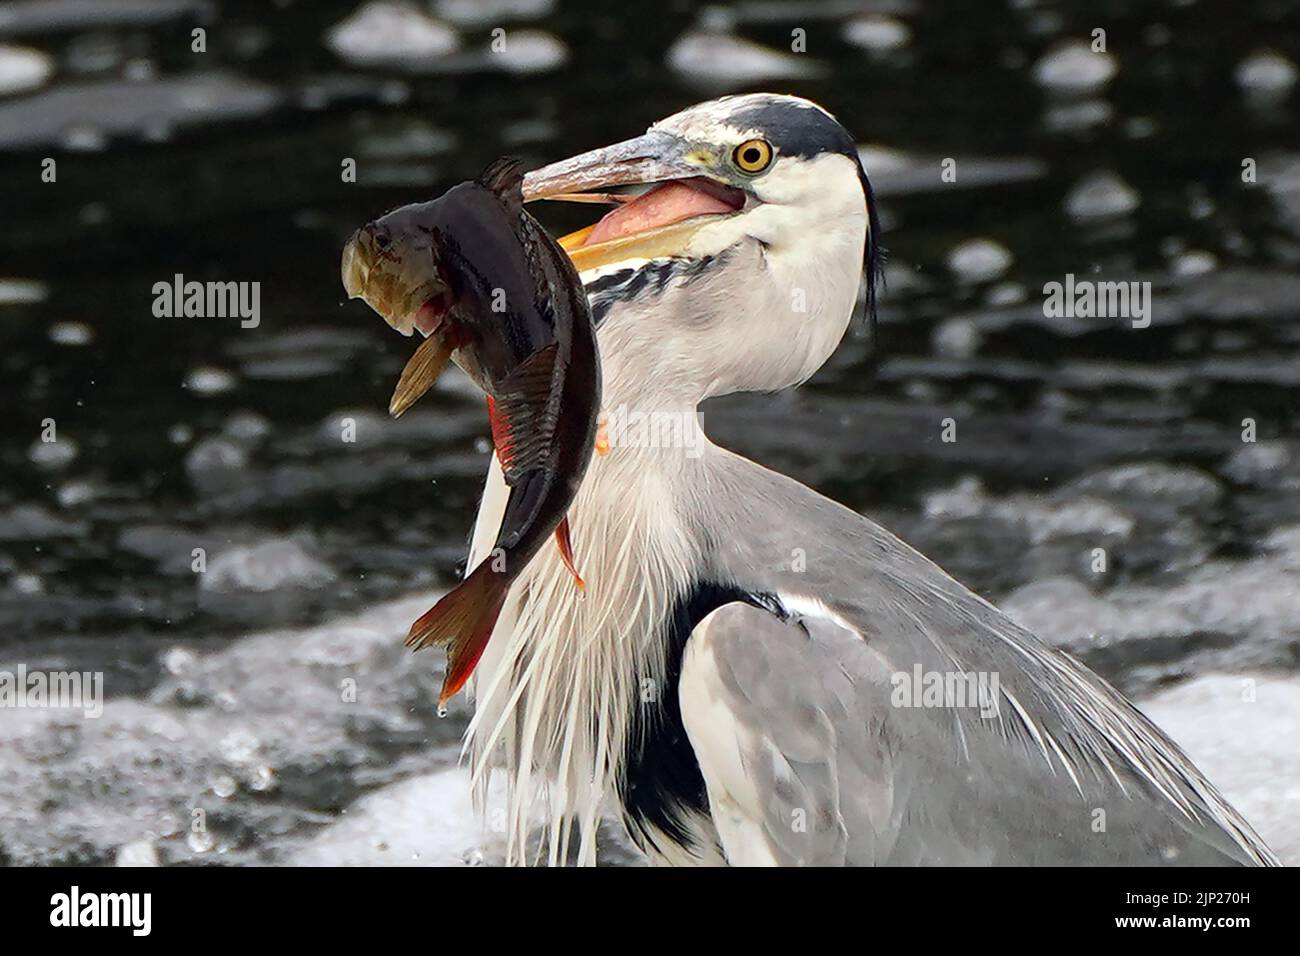 A herring with a perch fish in its mouth in the River Barrow, Carlow. Stock Photo